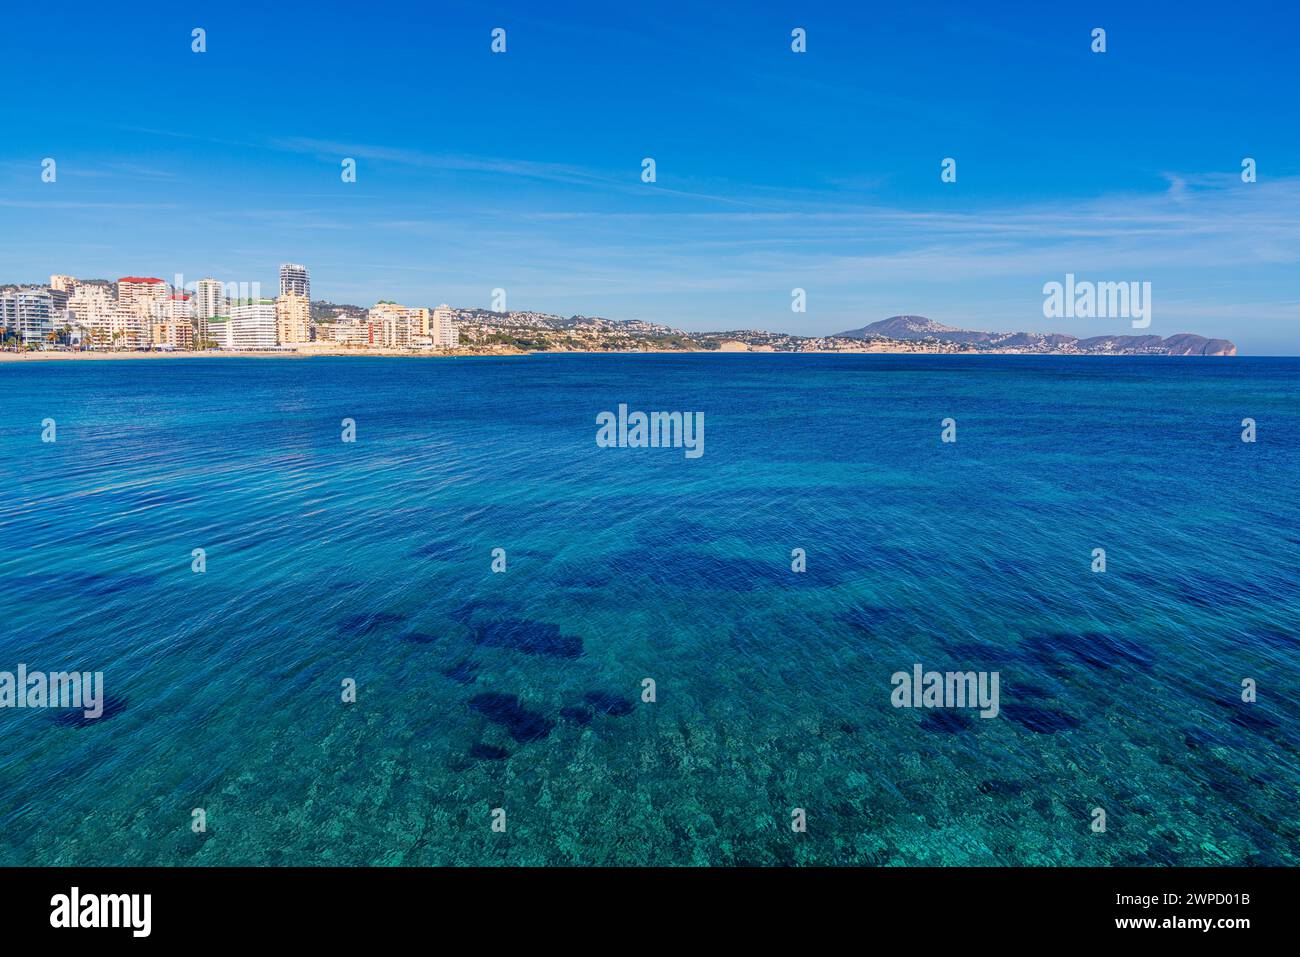 Panoramic view of the Costa Blanca in the Mediterranean Sea, Calpe, Spain Stock Photo